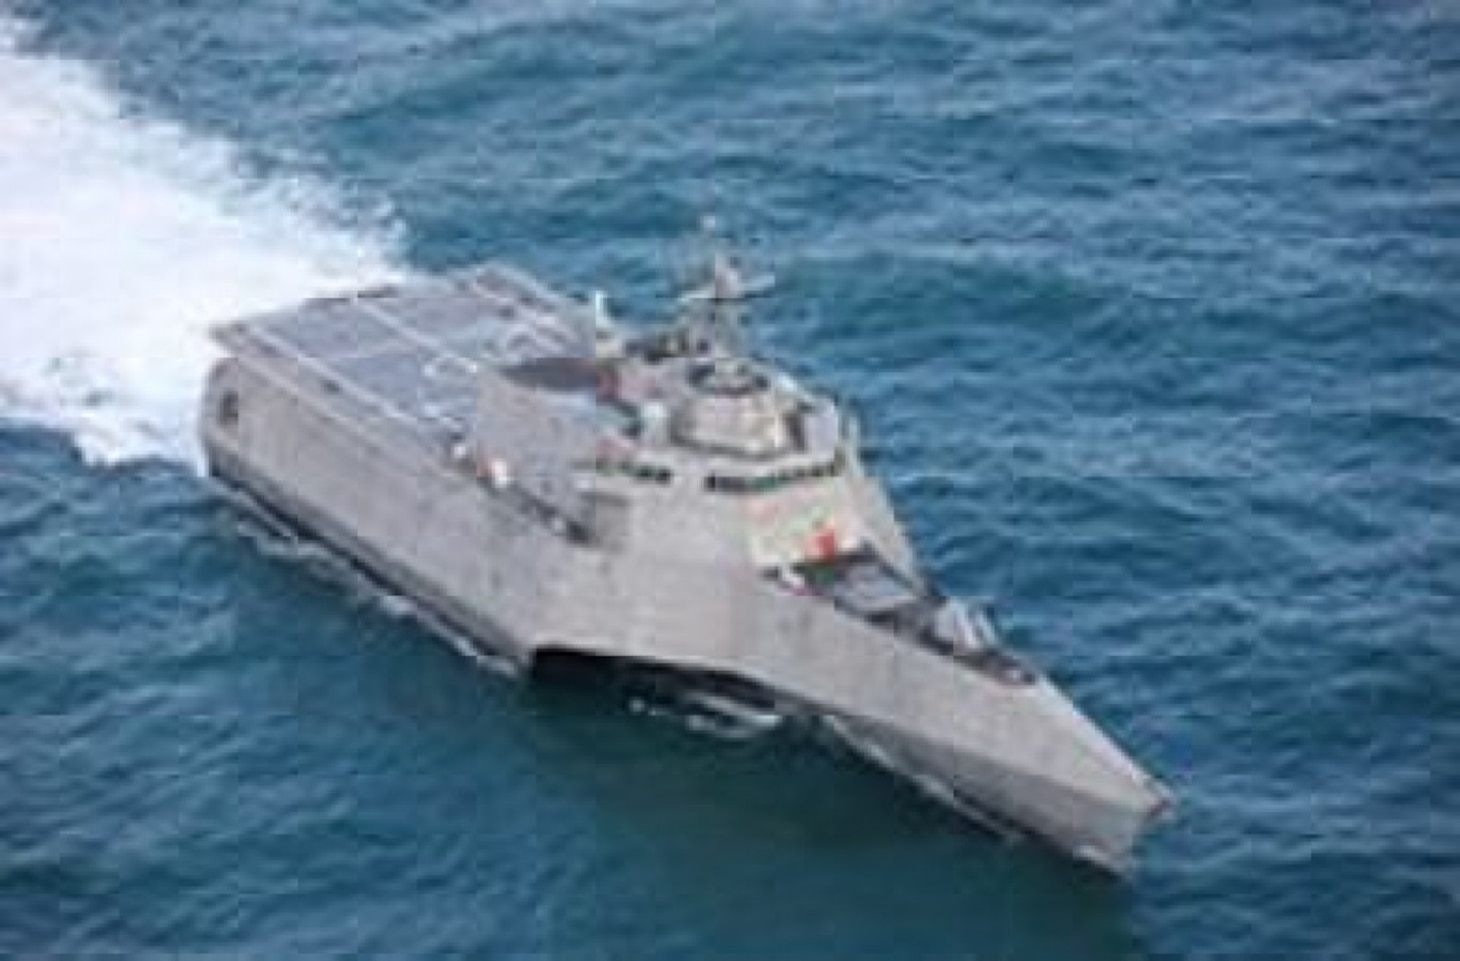 The future Independence-variant littoral combat ship USS Mobile (LCS 26) conducts sea trials. USS Mobile is set to be commissioned on 22 May in Mobile, Ala.